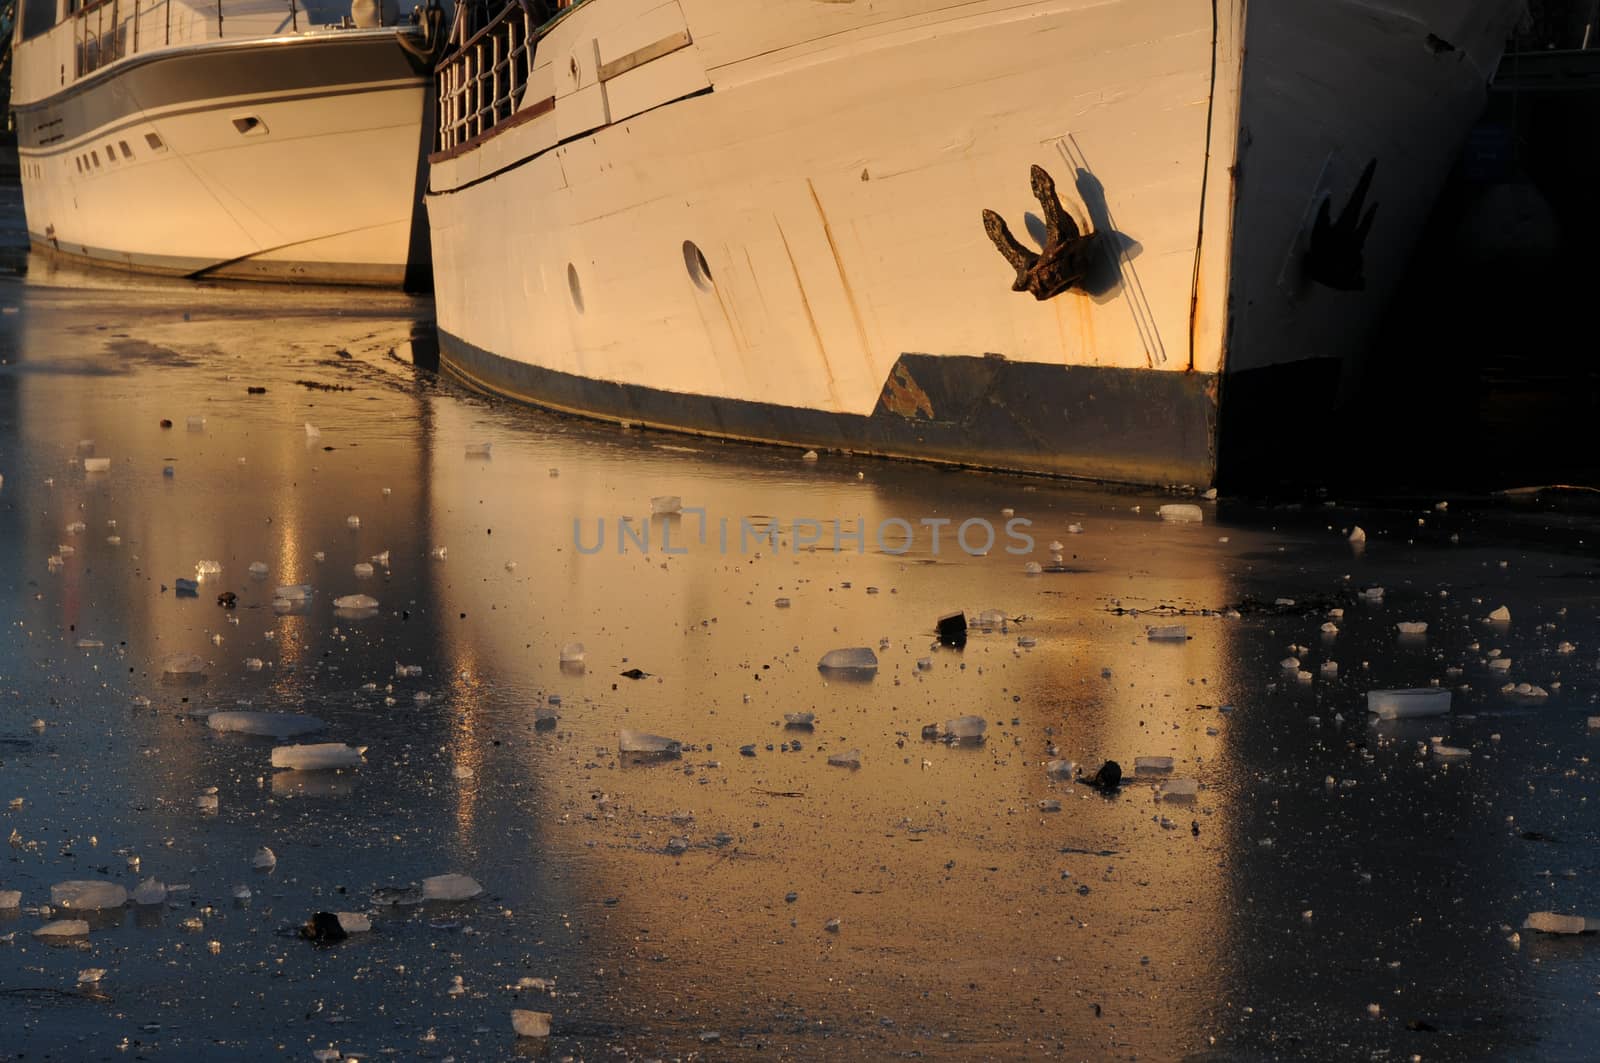 Boats stuck in frozen ice in a habour